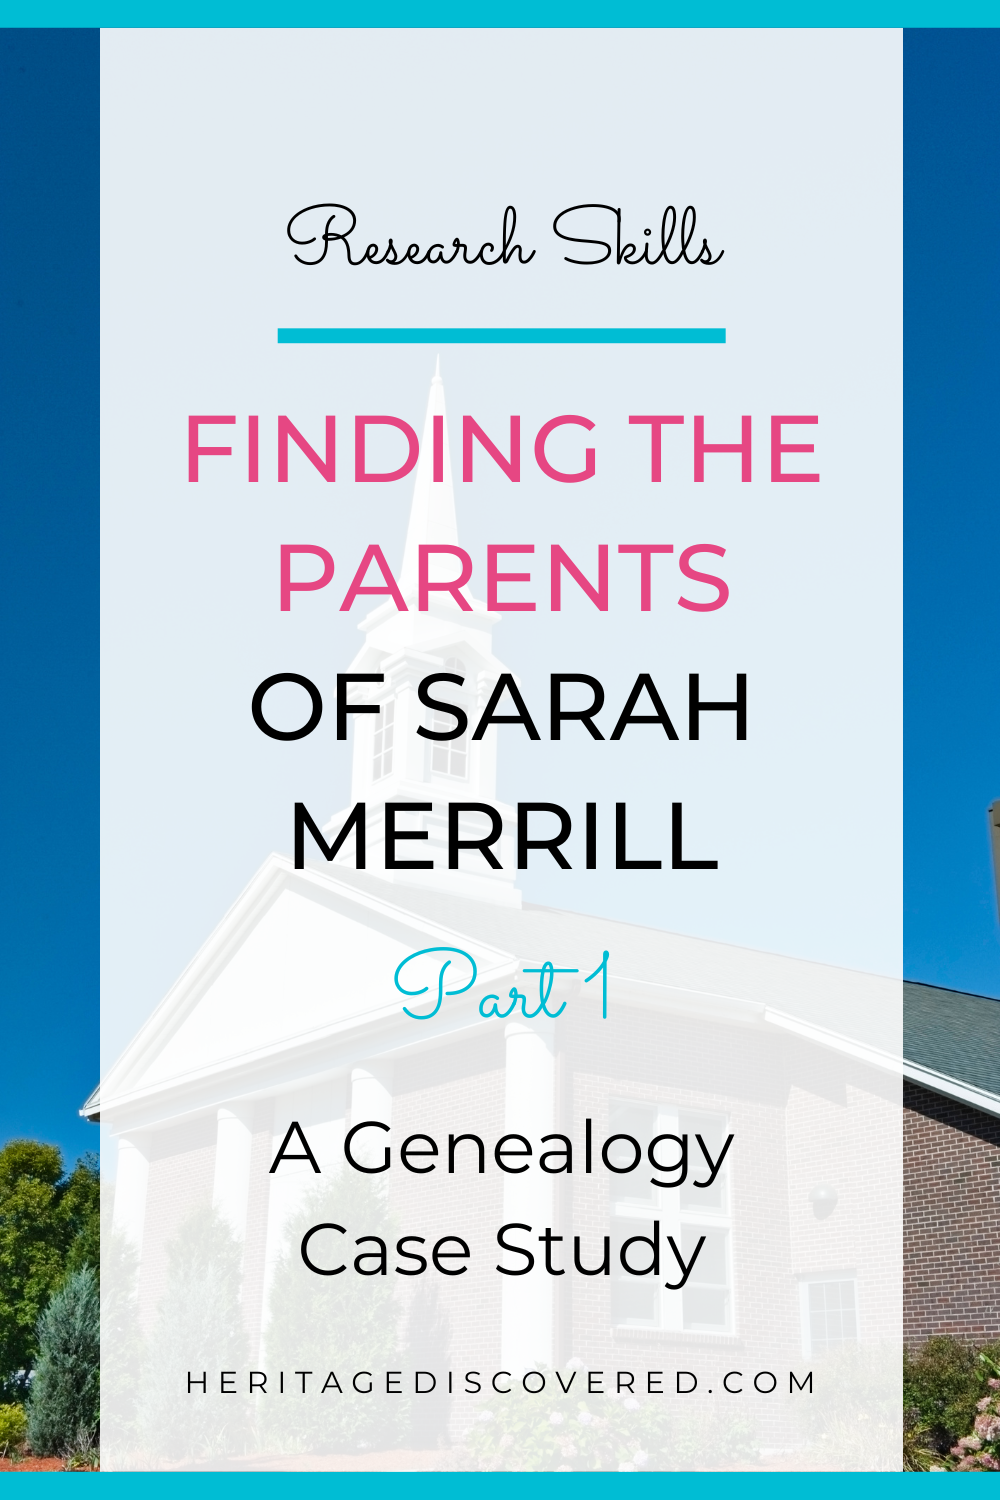 finding-the-parents-of-sarah-merrill-part-1-genealogy-case-study